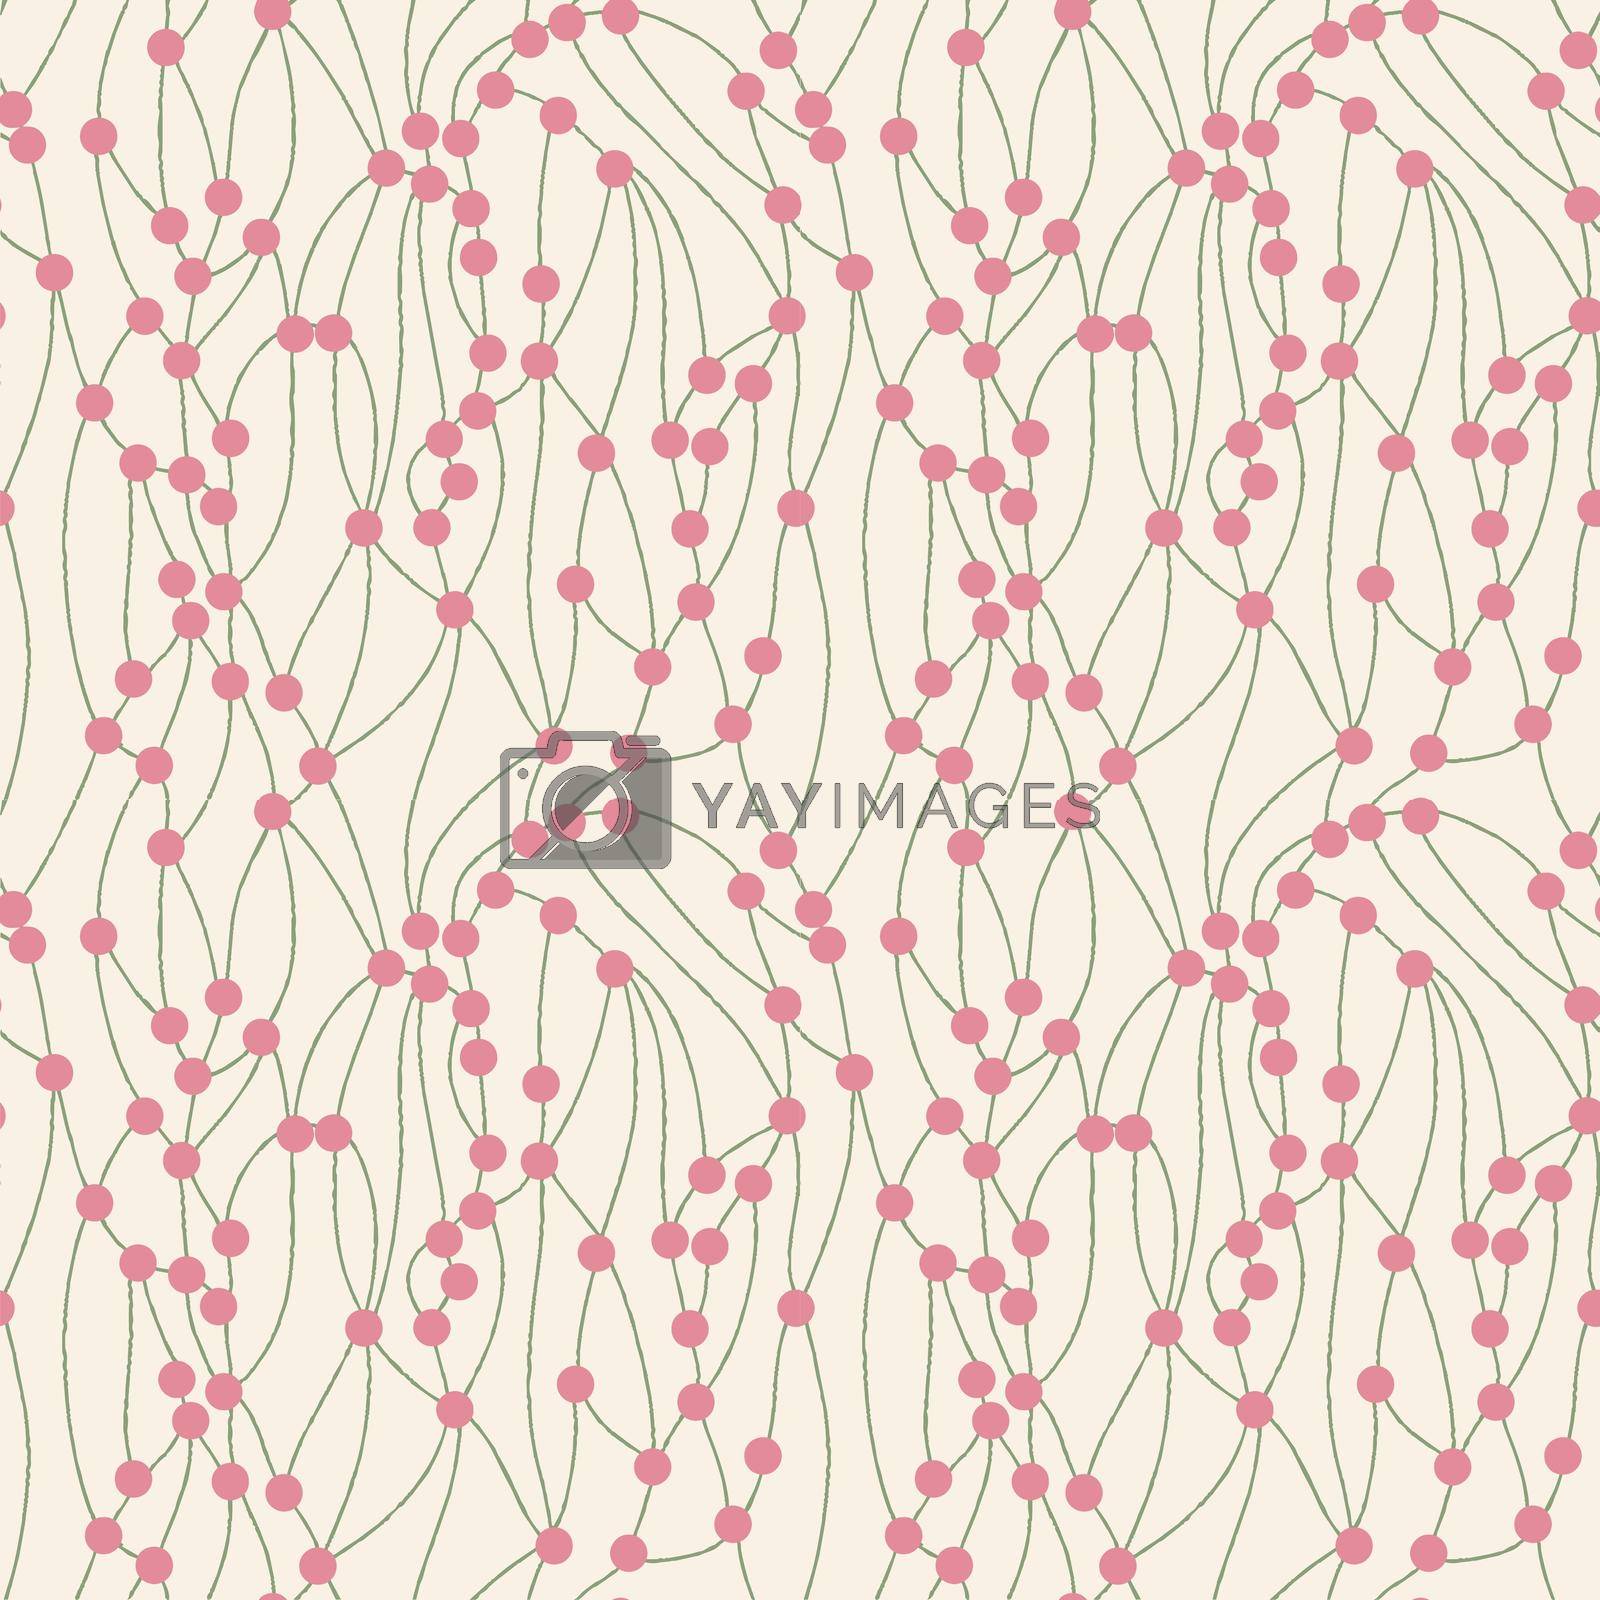 Royalty free image of smooth branches with berries seamless pattern delicate background by MariaTem